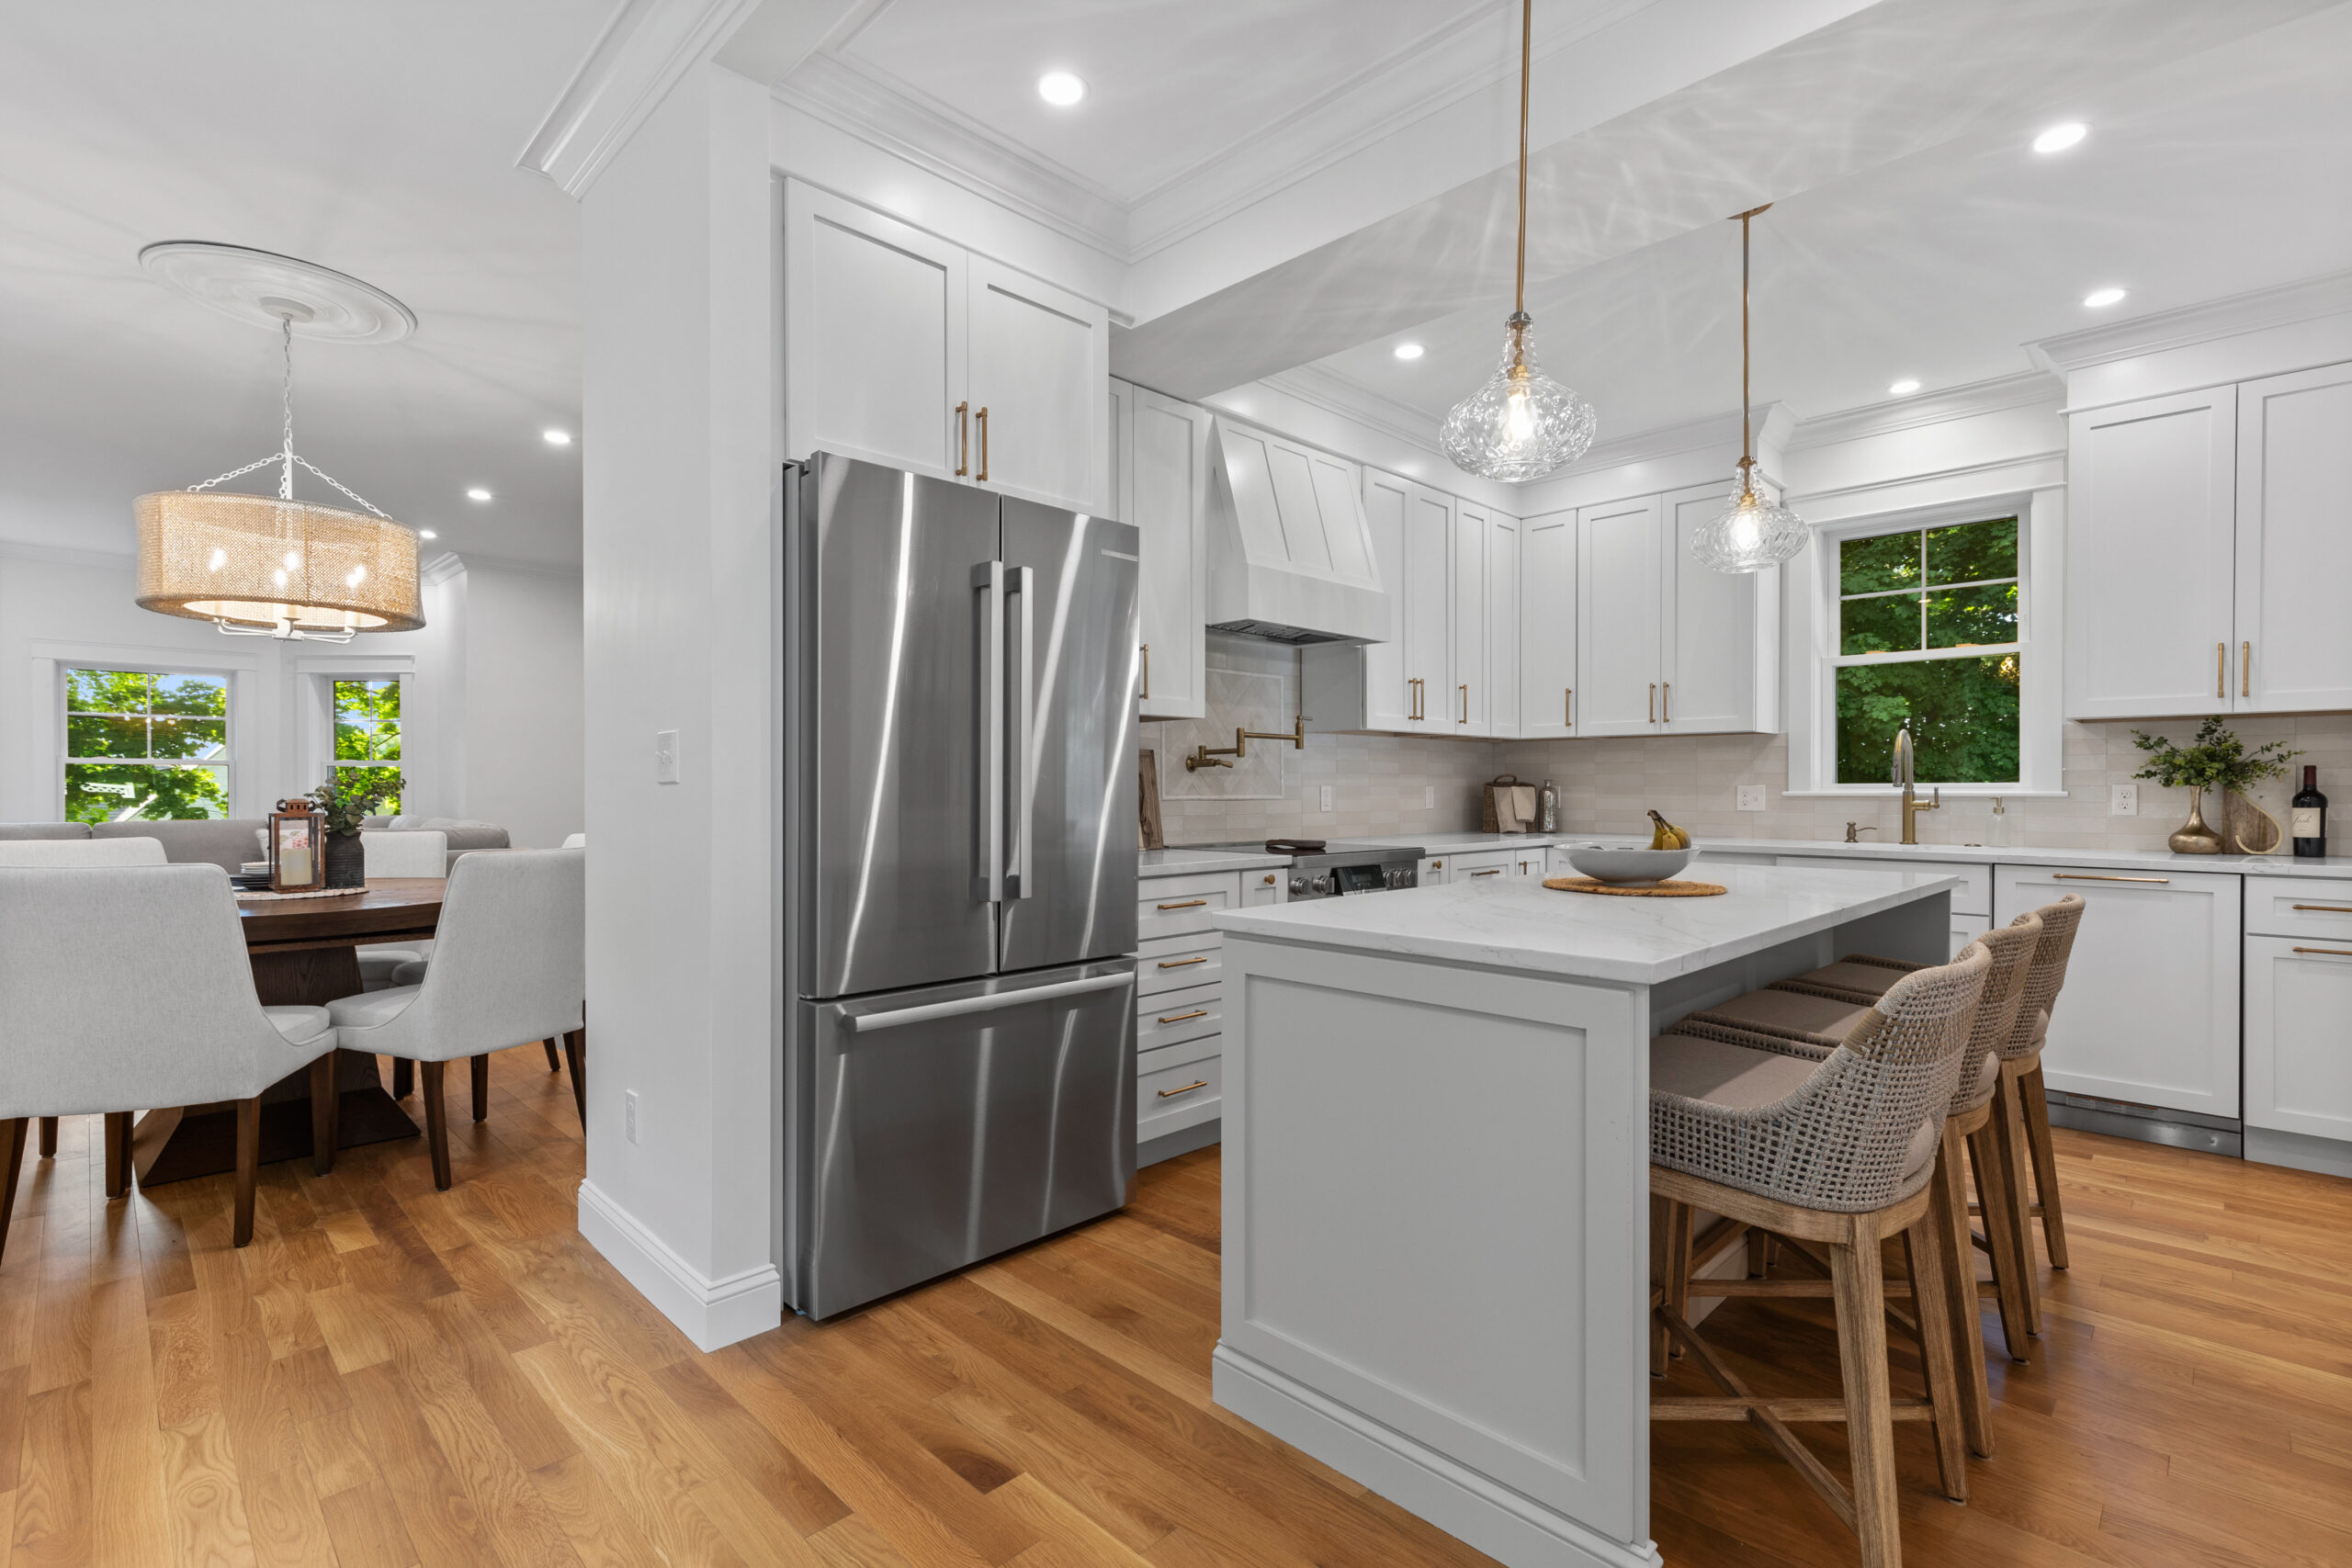 Image of a modern kitchen in a vintage New England home, post-renovation. The kitchen boasts an expansive layout with white cabinetry, marble countertops, and a central island. Elegant pendant lights and under-cabinet lighting highlight the clean lines and contemporary design, while hardwood floors add warmth to the space.